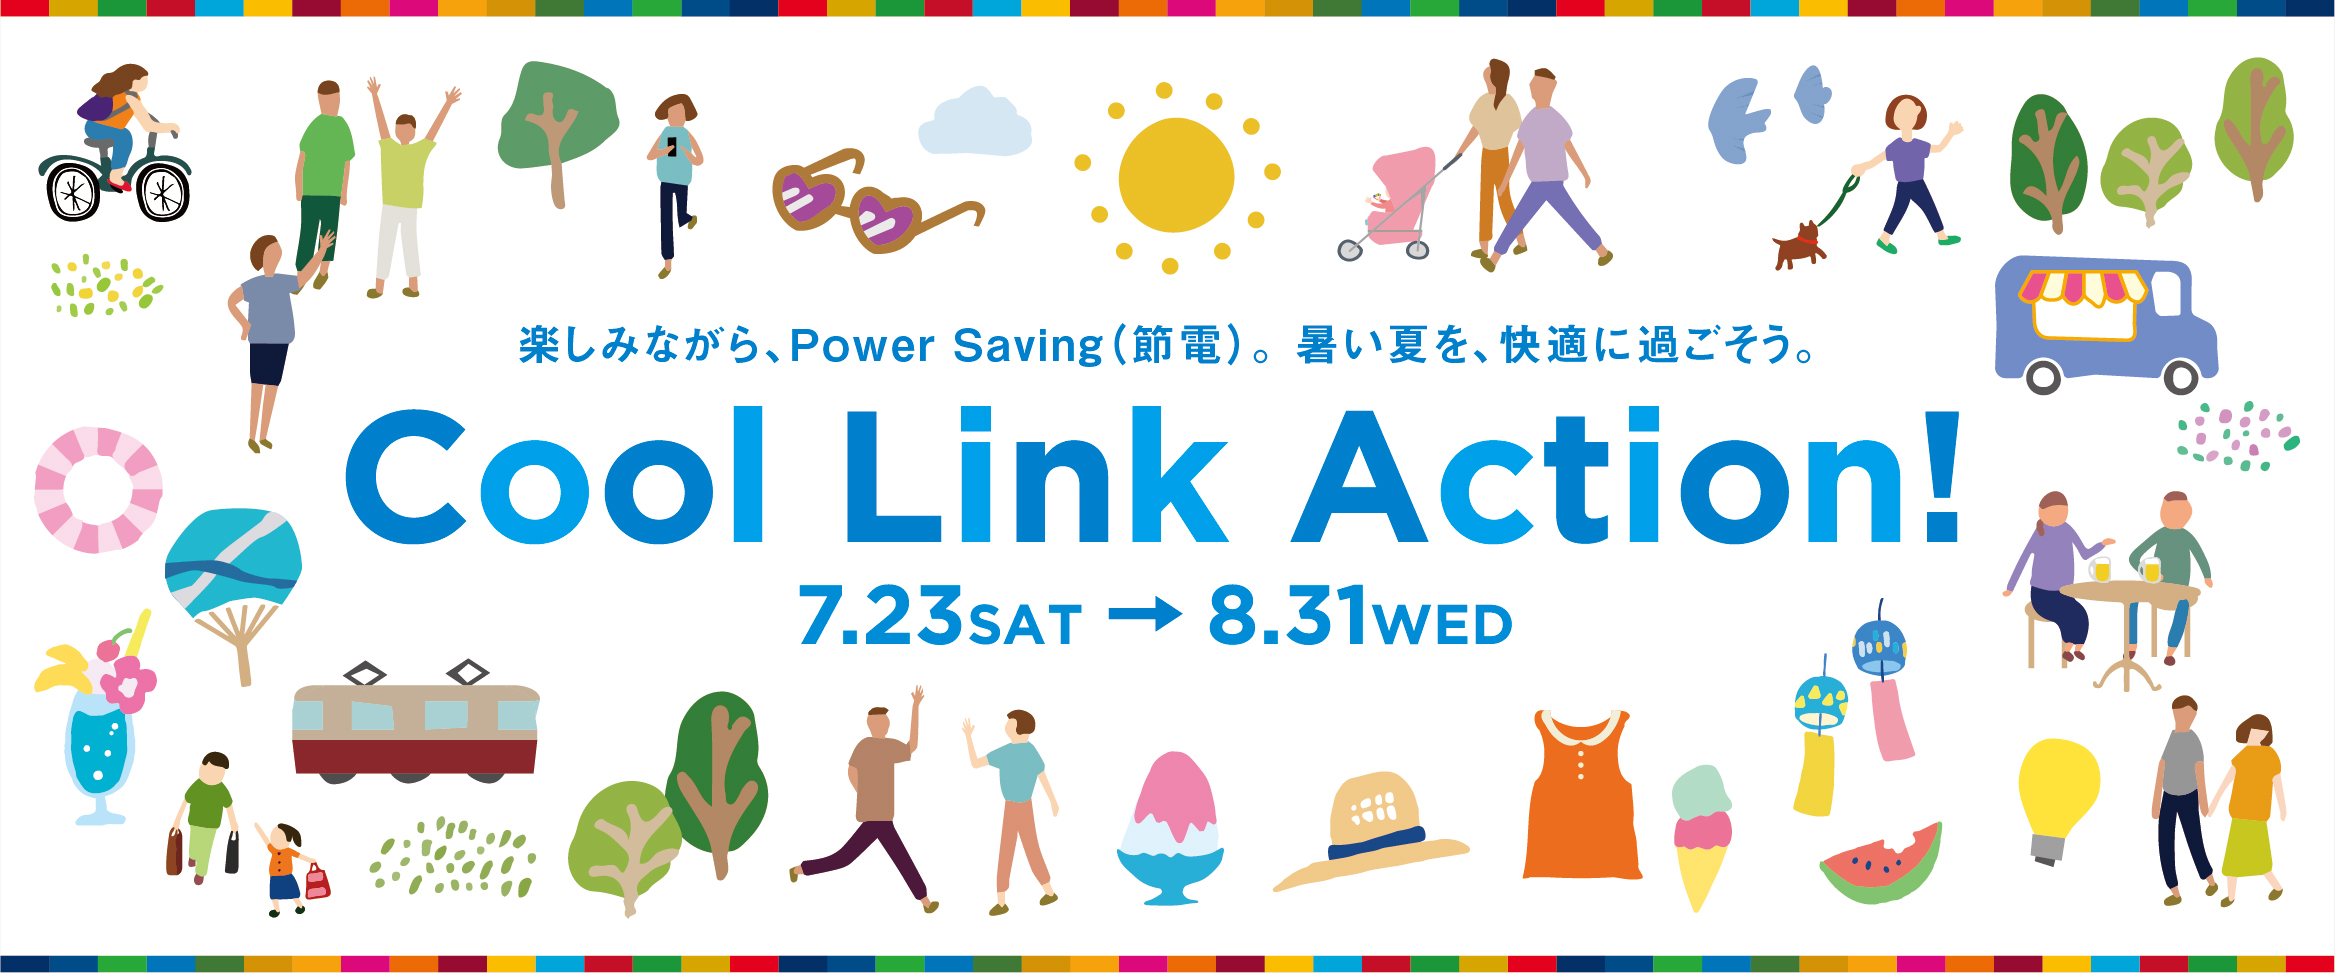 Cool Link Action